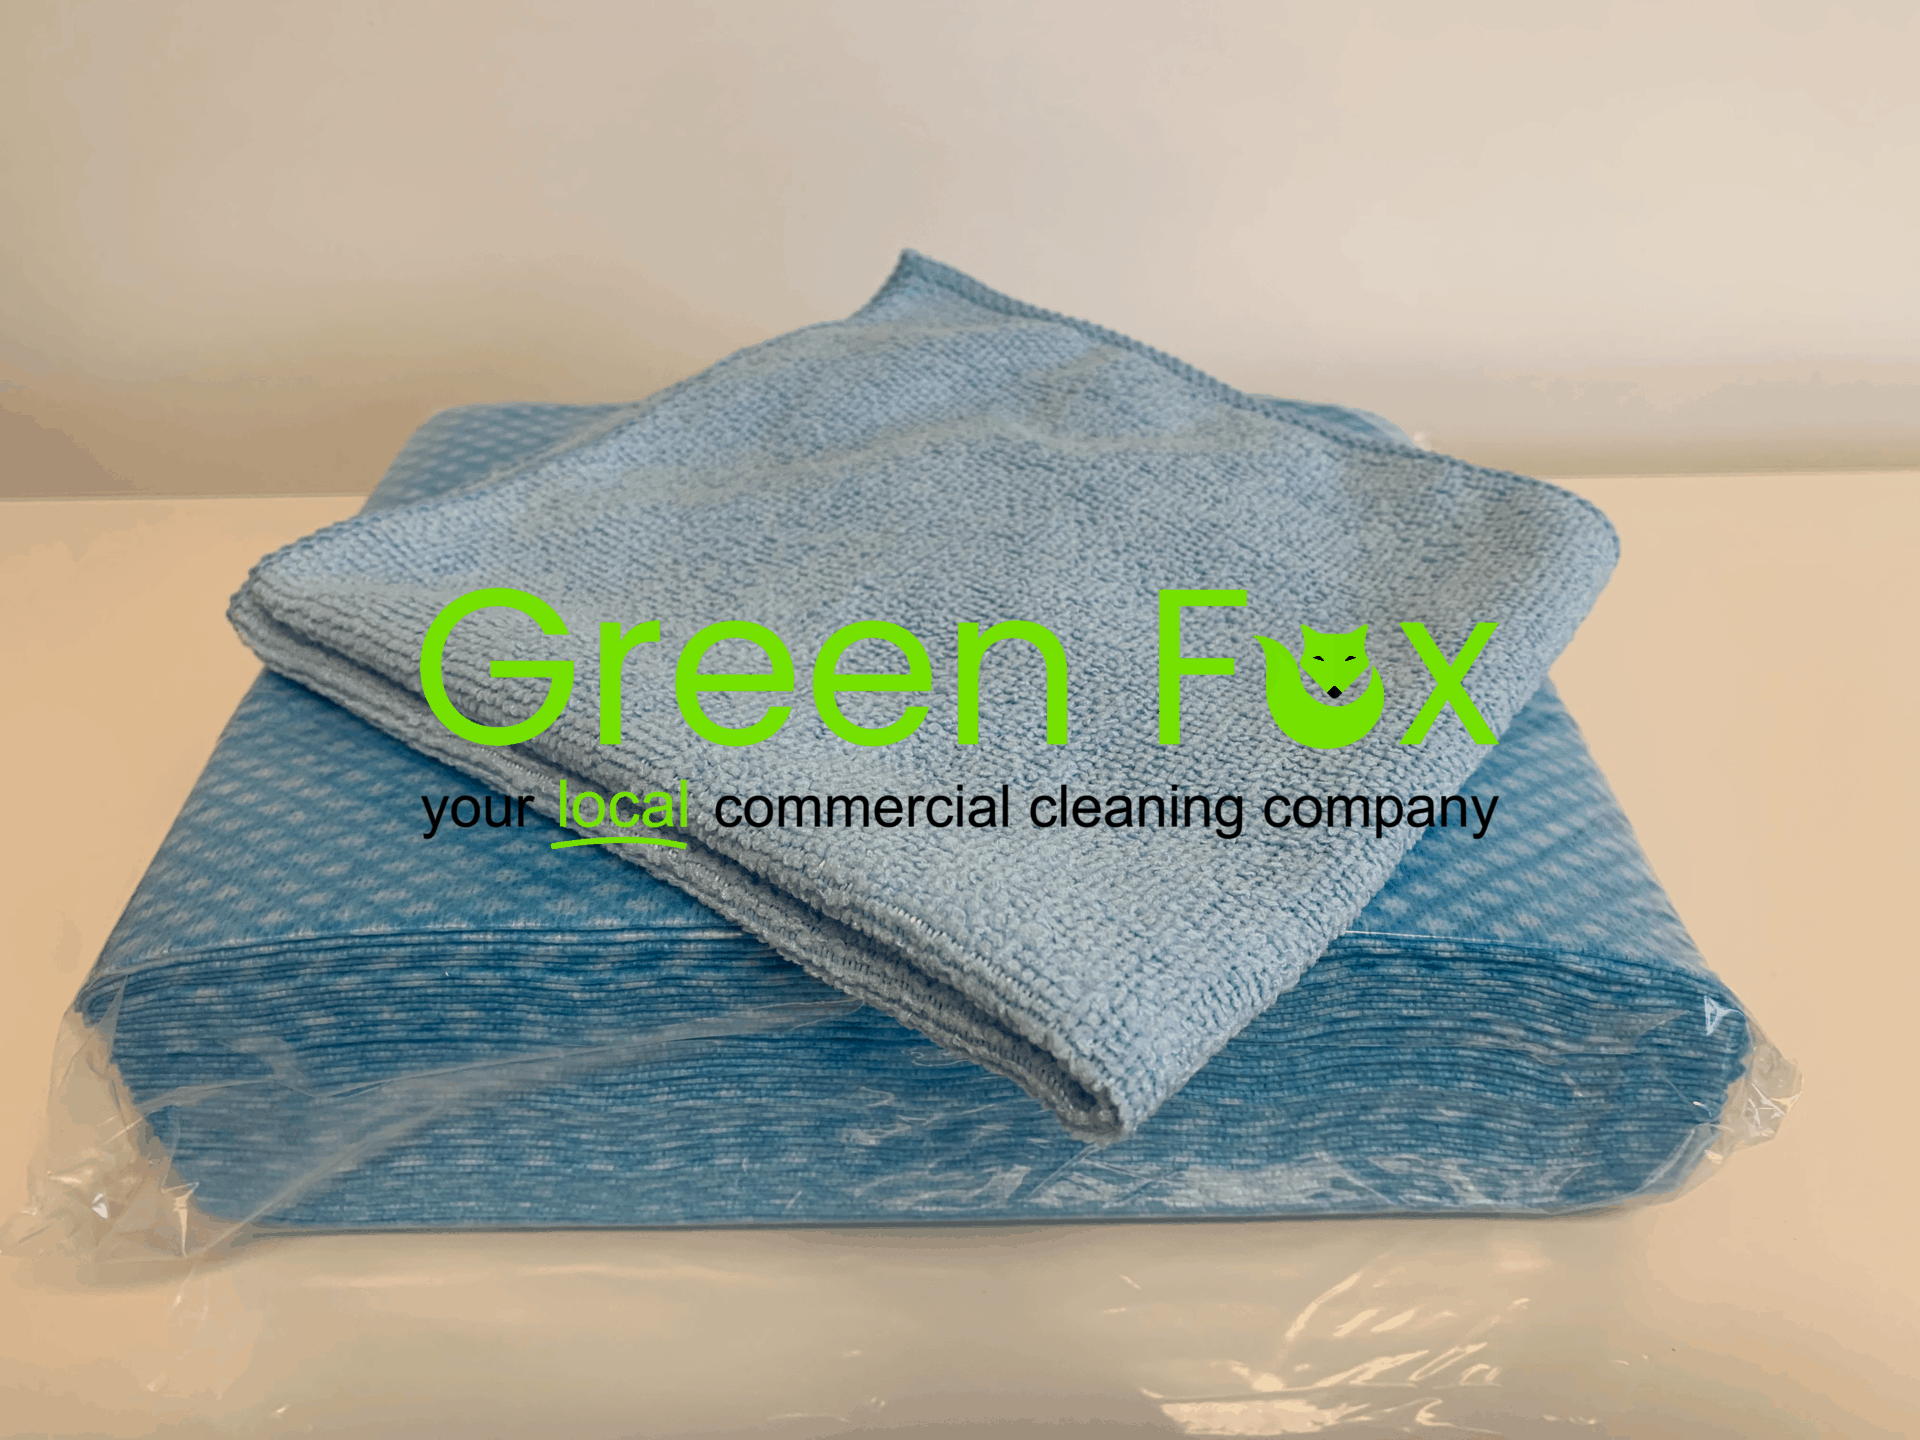 Microfibre or disposable cloths? 2 different options, but which is best ...